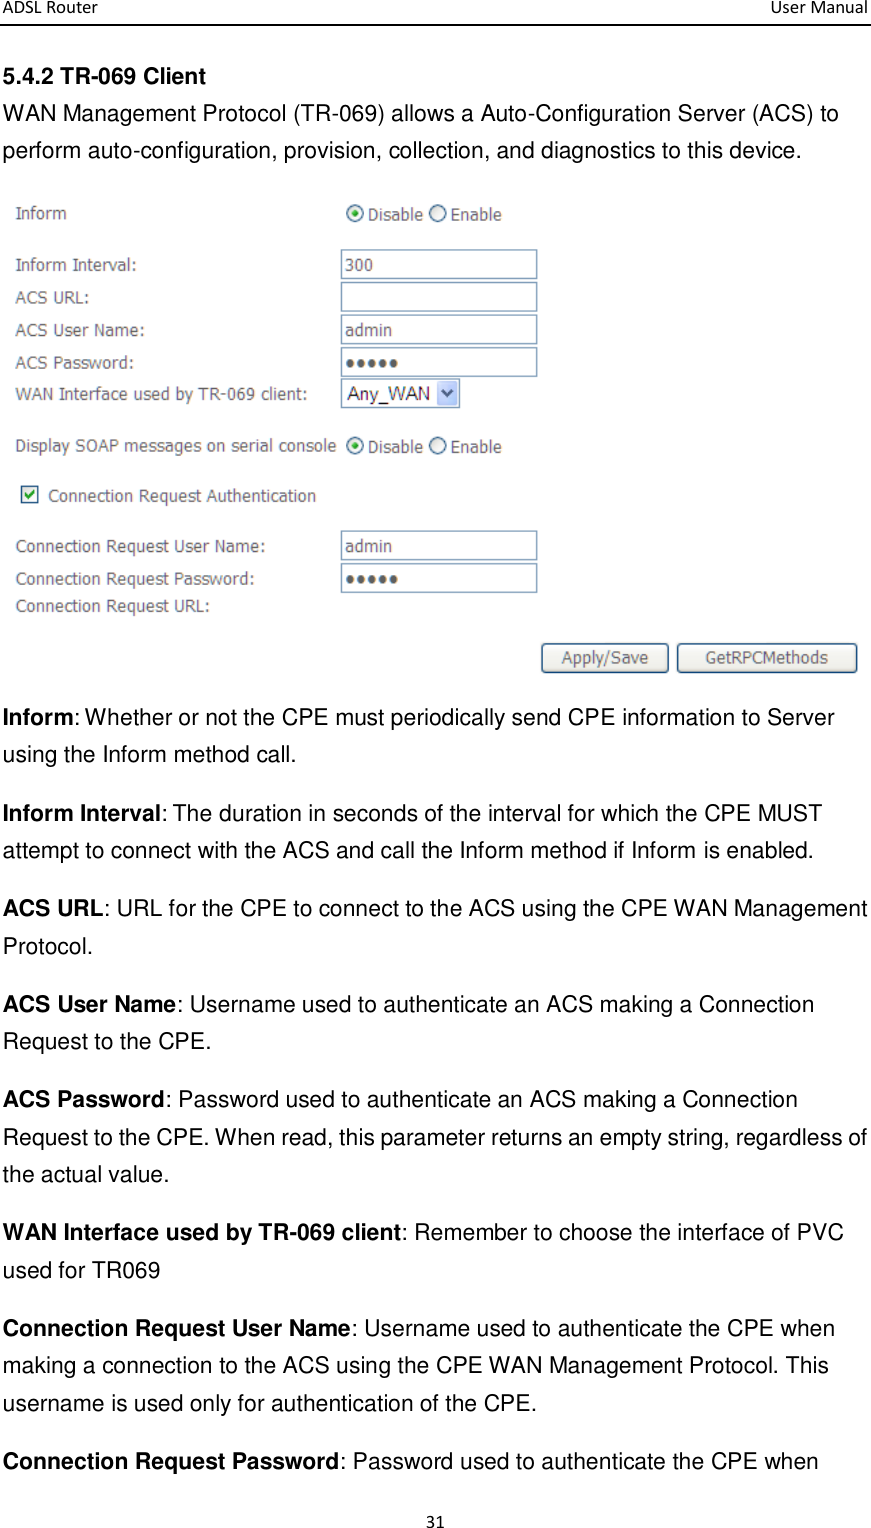 ADSL Router       User Manual 31 5.4.2 TR-069 Client WAN Management Protocol (TR-069) allows a Auto-Configuration Server (ACS) to perform auto-configuration, provision, collection, and diagnostics to this device.  Inform: Whether or not the CPE must periodically send CPE information to Server using the Inform method call. Inform Interval: The duration in seconds of the interval for which the CPE MUST attempt to connect with the ACS and call the Inform method if Inform is enabled. ACS URL: URL for the CPE to connect to the ACS using the CPE WAN Management Protocol.   ACS User Name: Username used to authenticate an ACS making a Connection Request to the CPE. ACS Password: Password used to authenticate an ACS making a Connection Request to the CPE. When read, this parameter returns an empty string, regardless of the actual value. WAN Interface used by TR-069 client: Remember to choose the interface of PVC used for TR069 Connection Request User Name: Username used to authenticate the CPE when making a connection to the ACS using the CPE WAN Management Protocol. This username is used only for authentication of the CPE.   Connection Request Password: Password used to authenticate the CPE when 